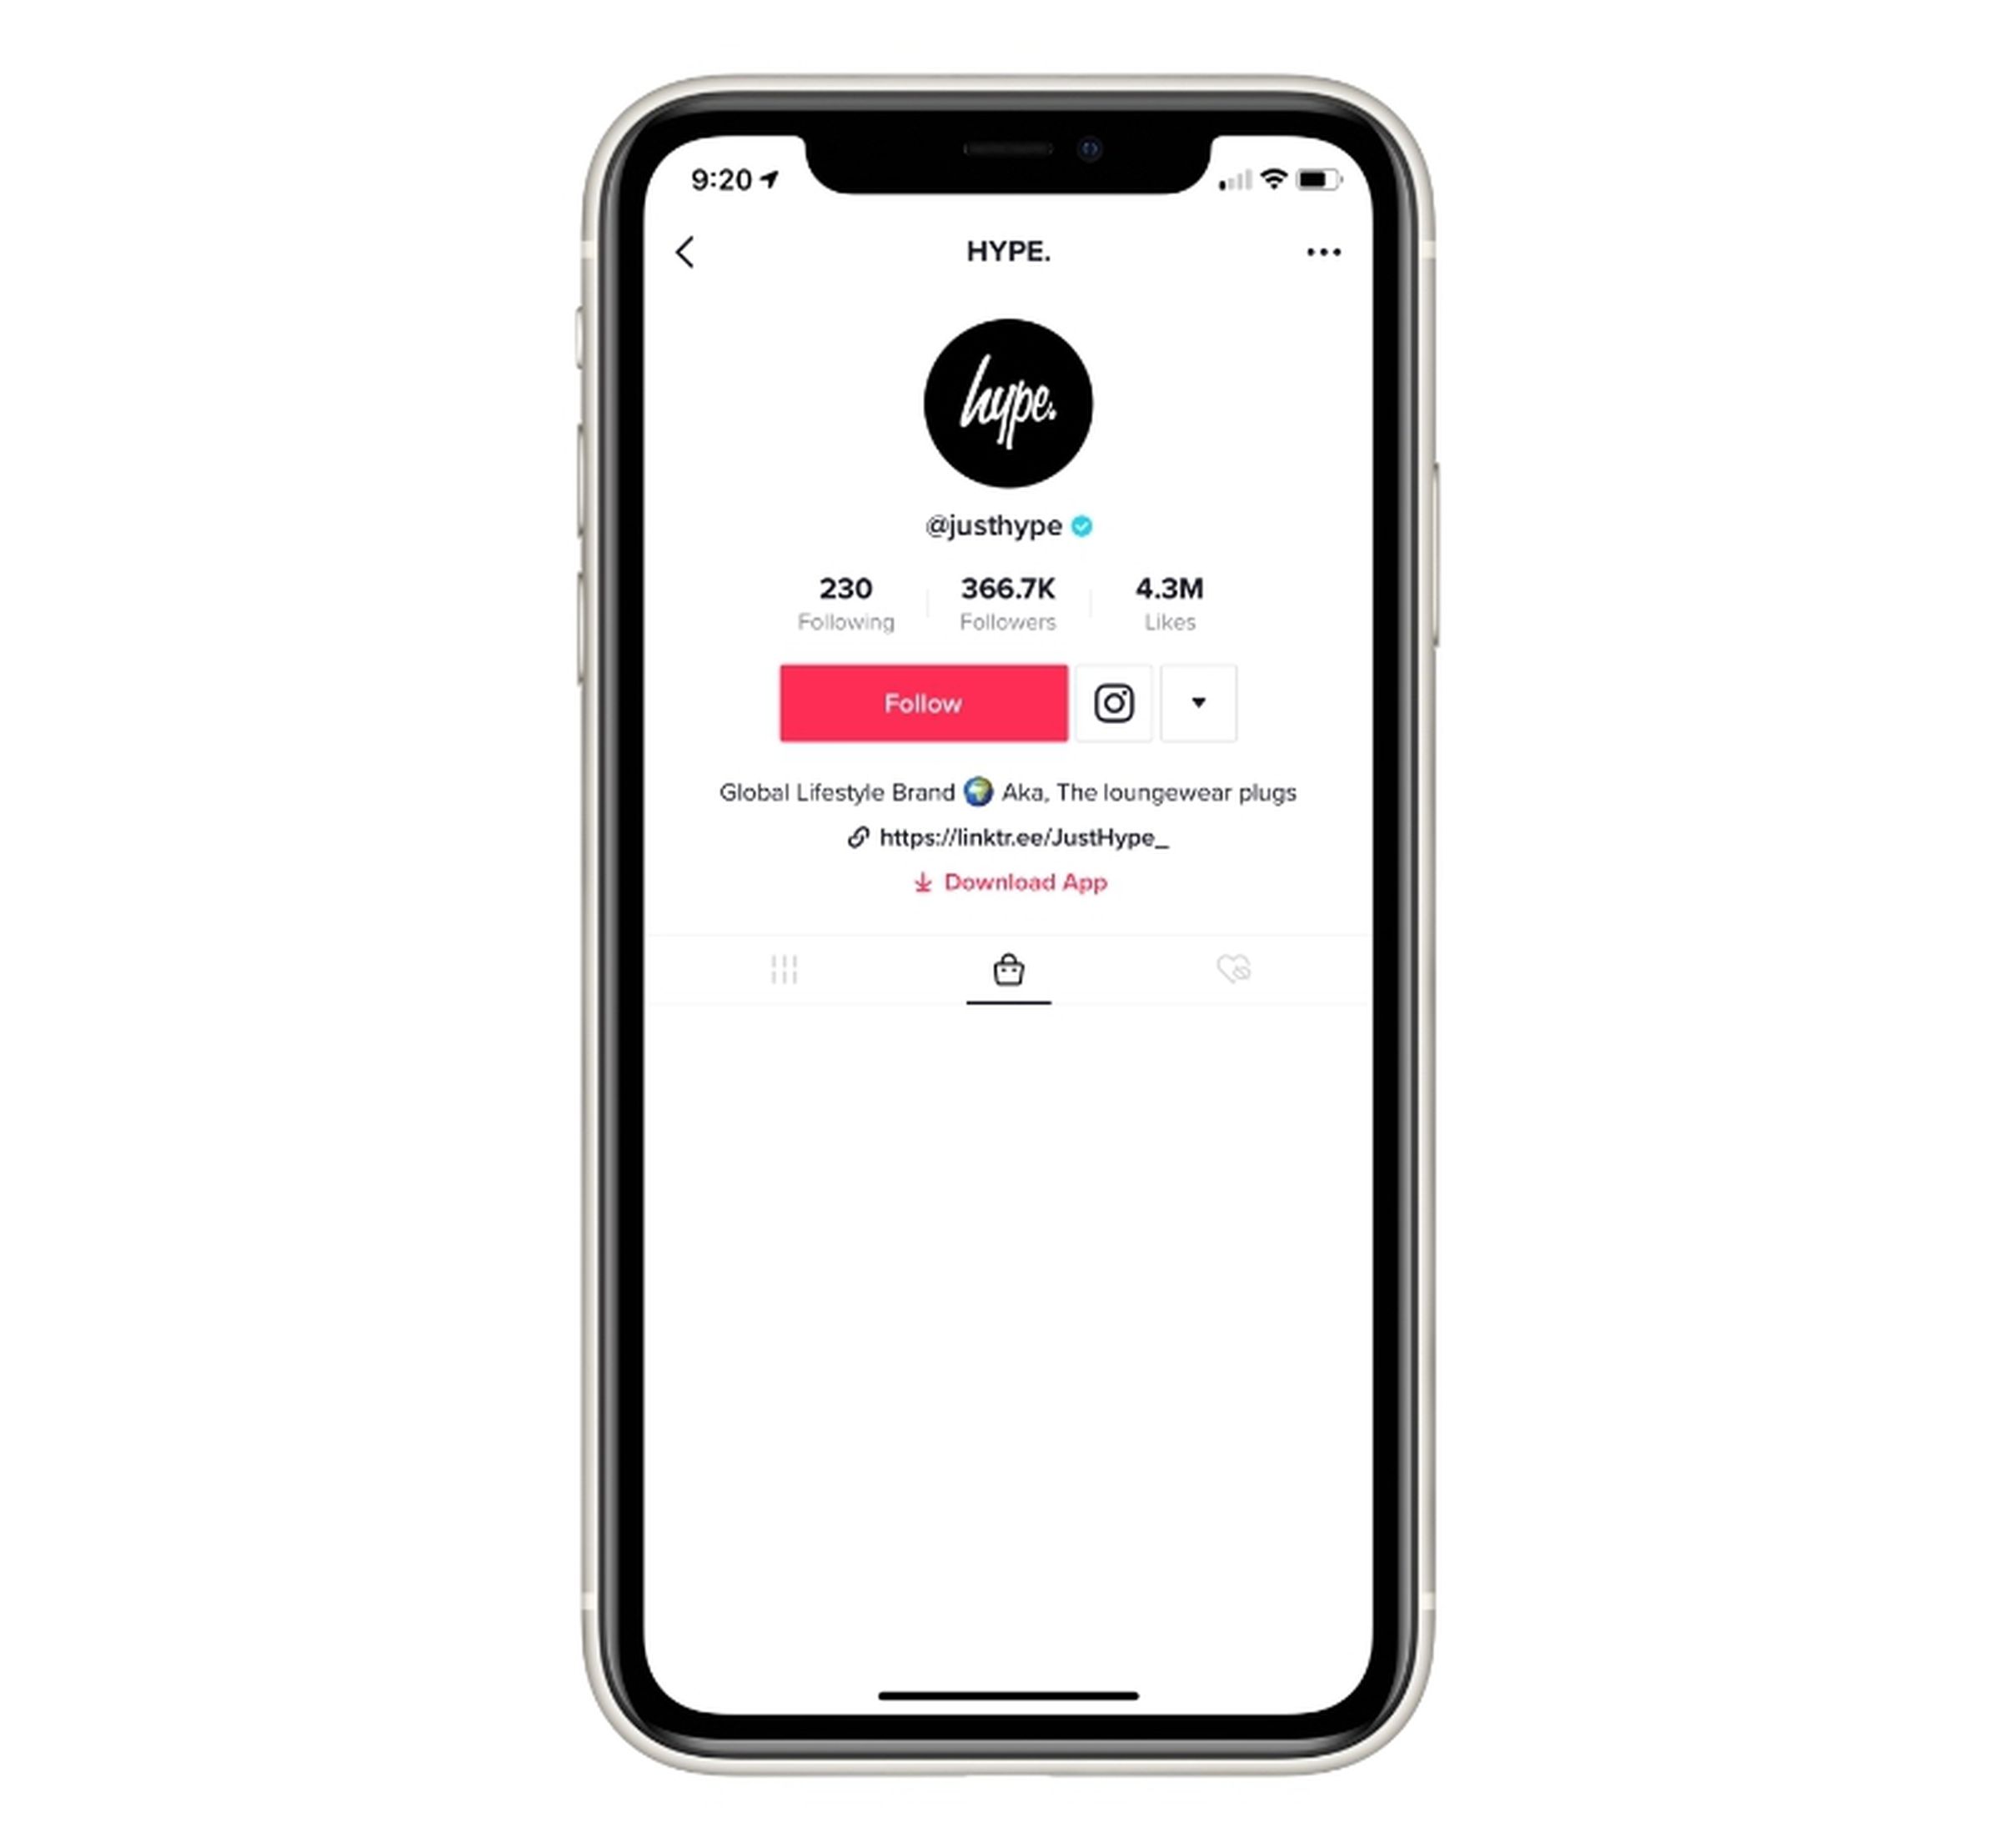 The Hype account page on TikTok shows what looks like a shopping tab.